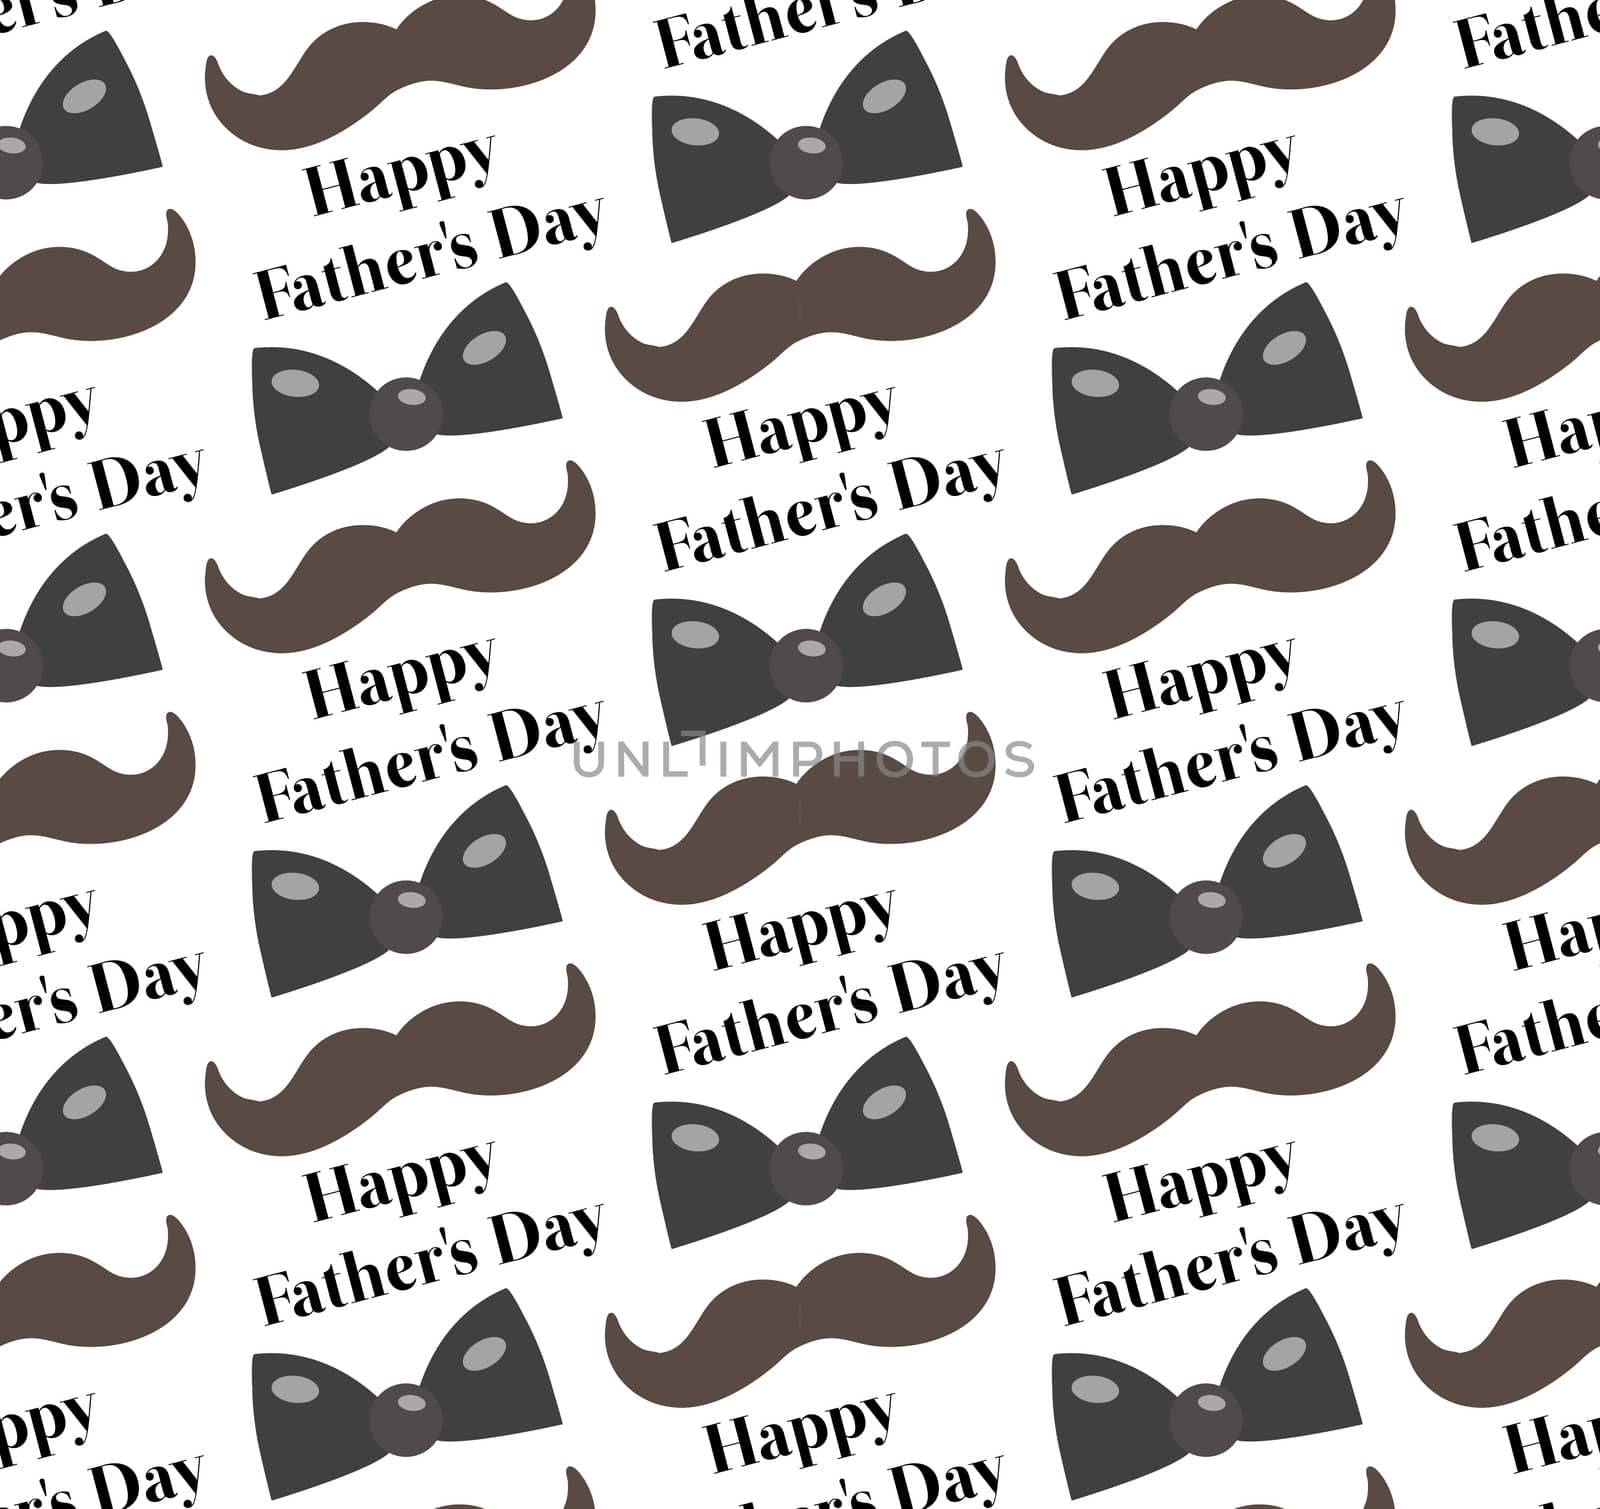 Mustache, Bow tie seamless patterns. Father s Day holiday concept repeating texture, endless background. illustration